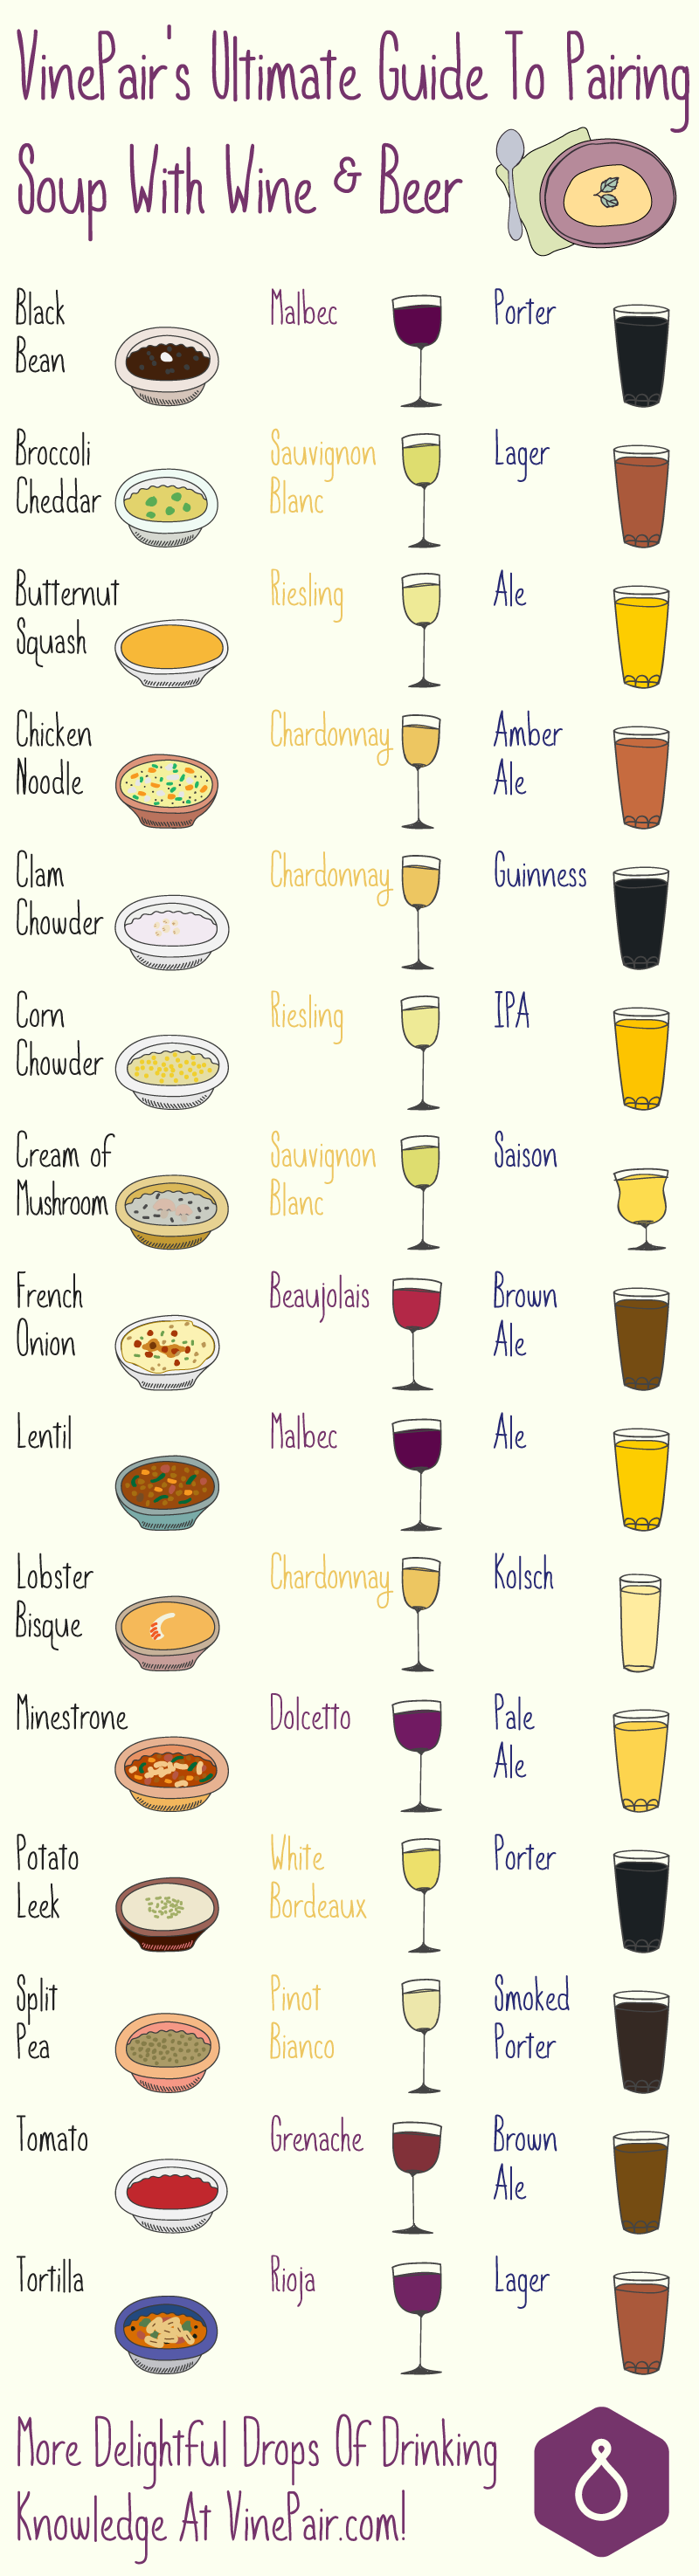 The Ultimate Guide To Pairing Soup With Wine And Beer - Infographic